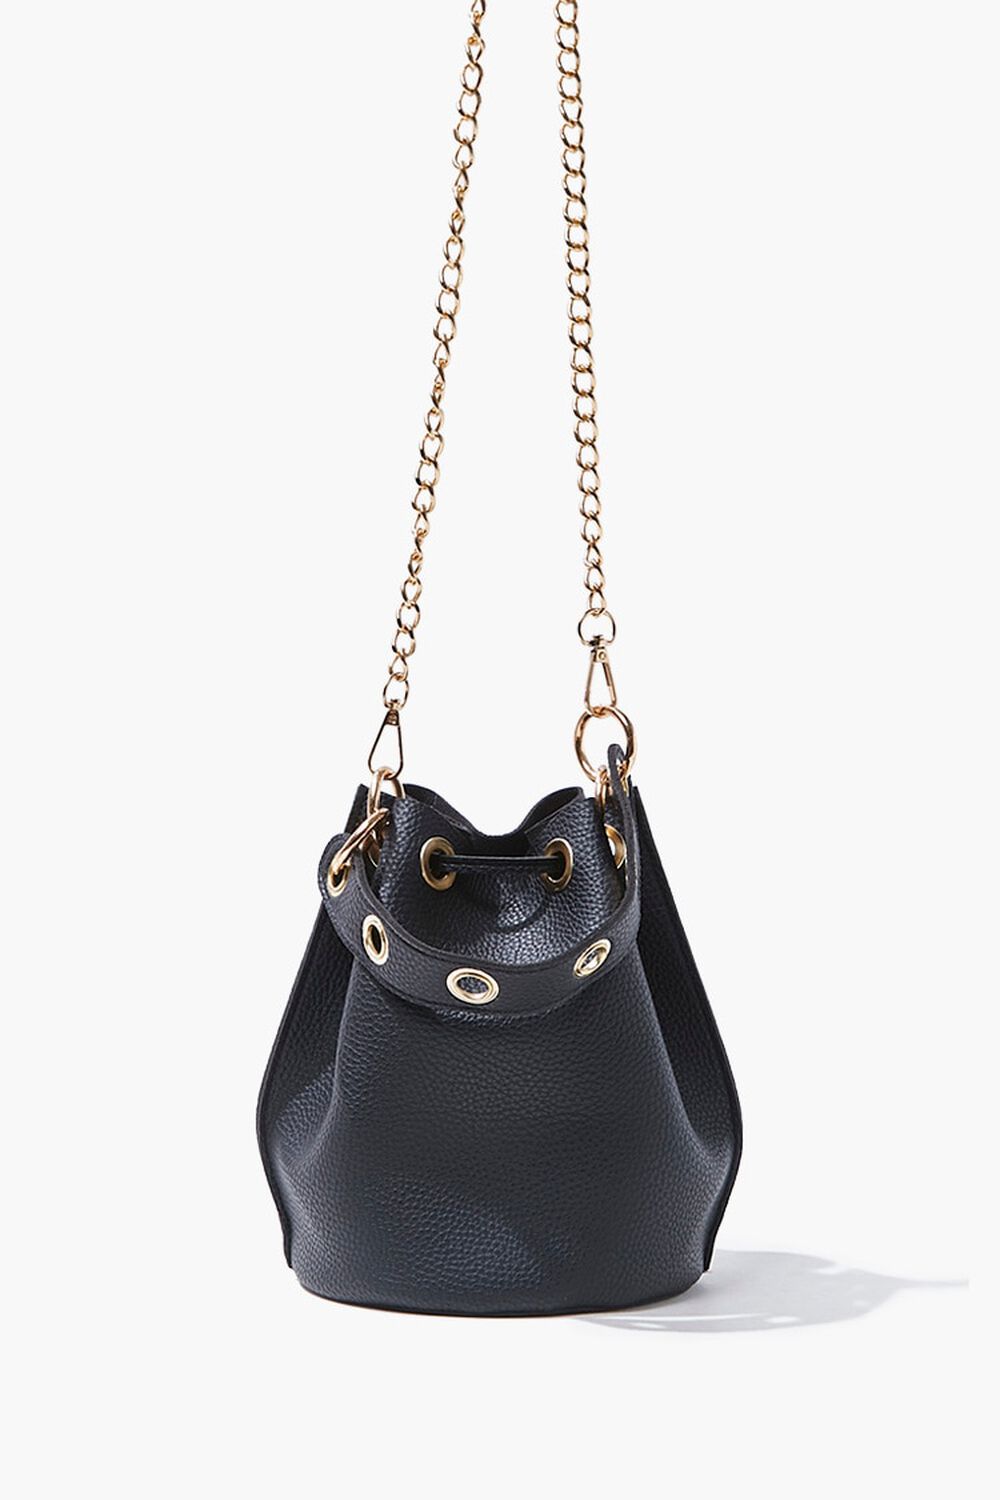 Shop Faux Leather Bucket Bag for Women from latest collection at Forever 21